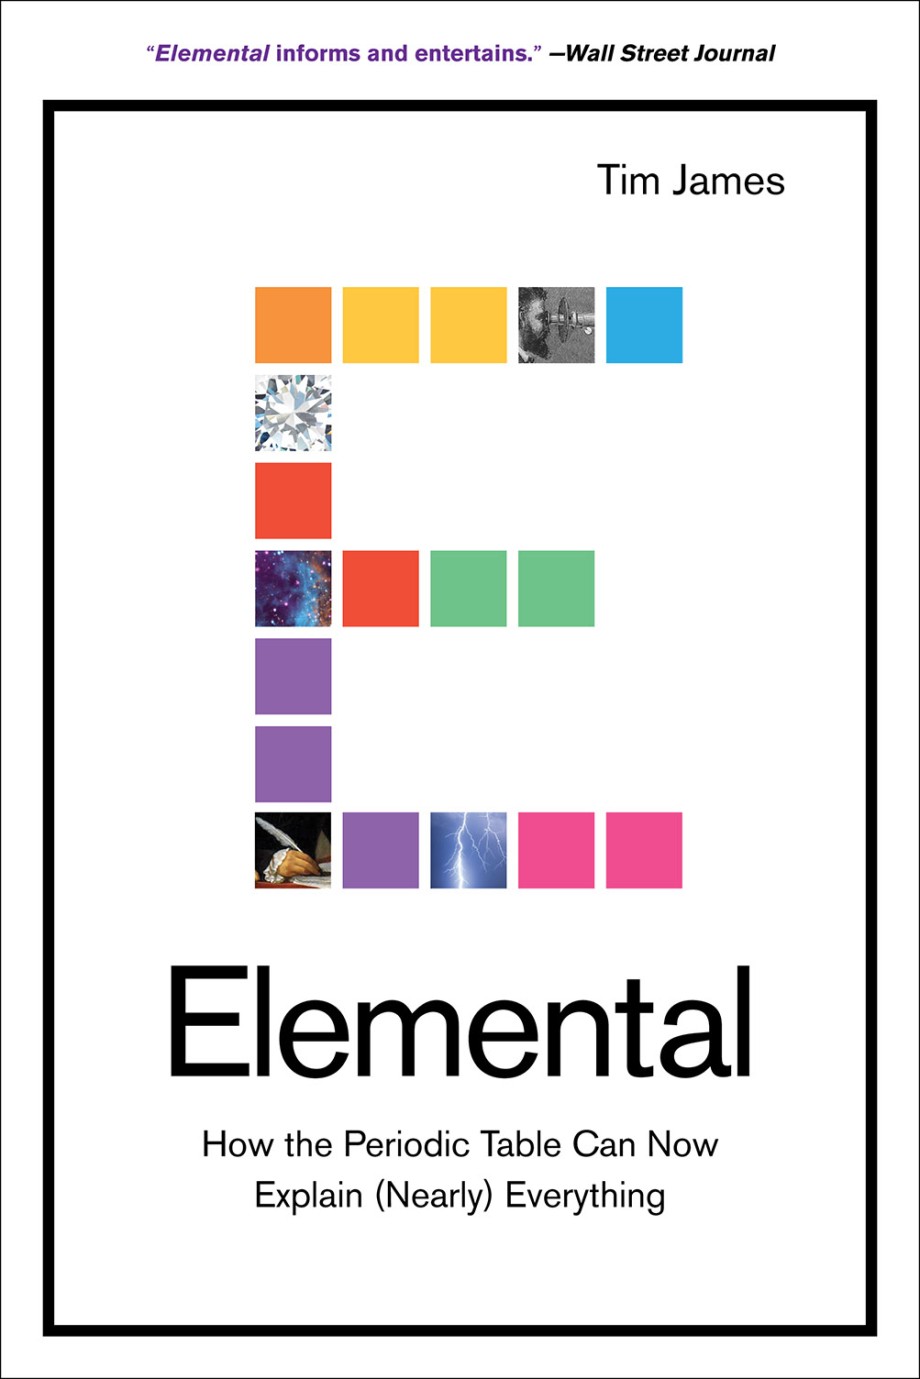 Elemental How the Periodic Table Can Now Explain (Nearly) Everything